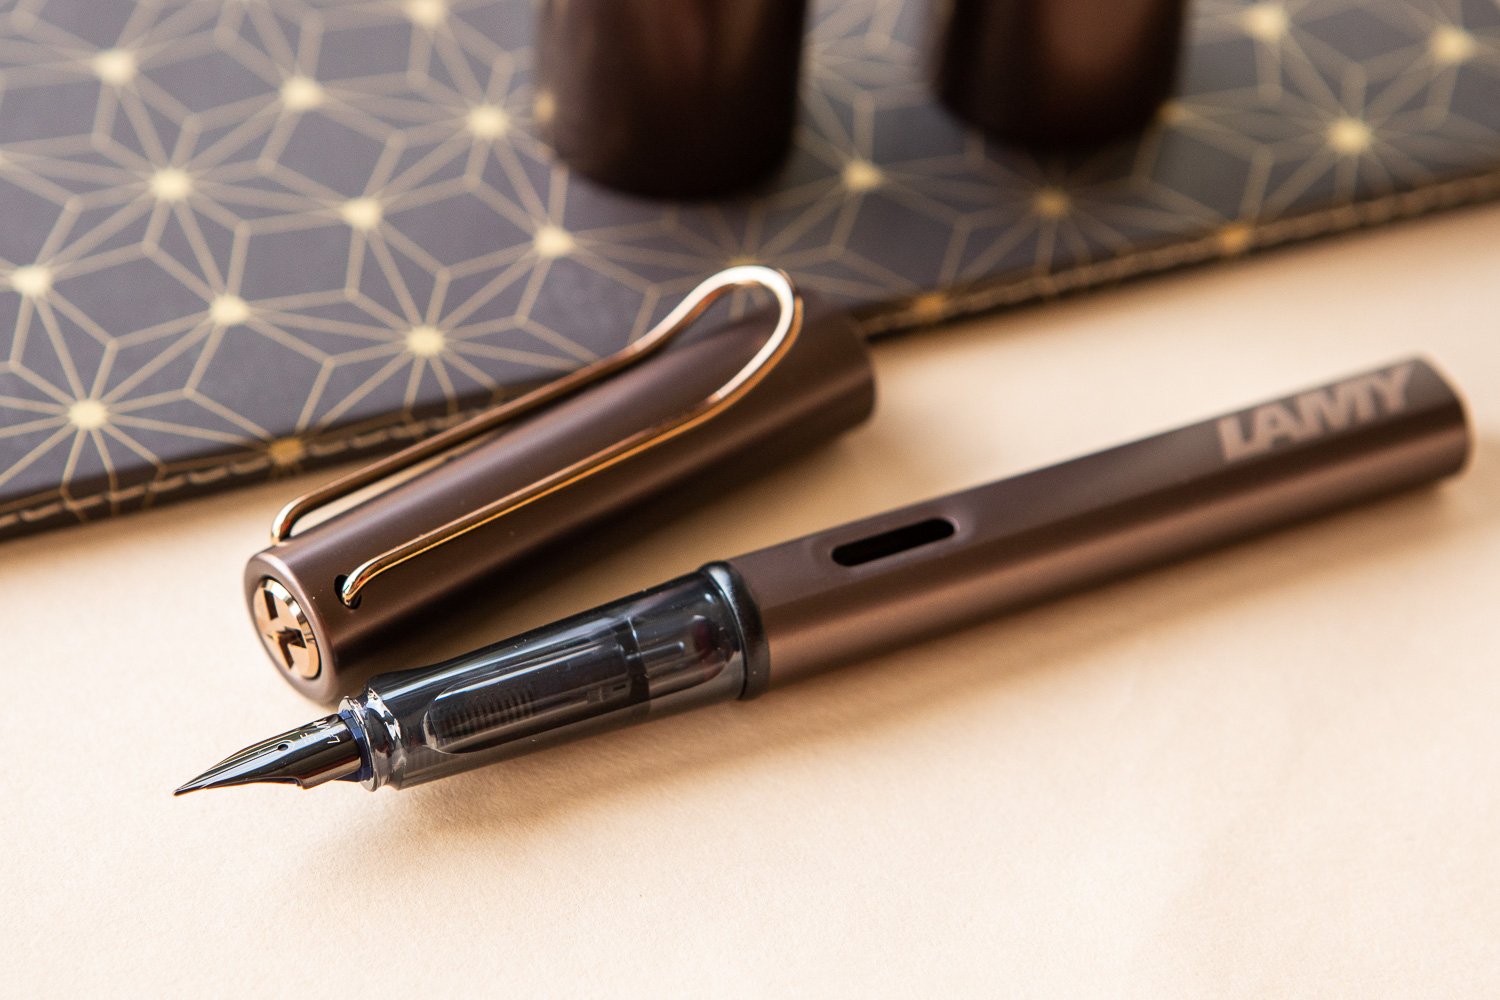 Beraadslagen cowboy Loodgieter Goulet Pens on Twitter: "The first special edition color of the LAMY LX is  now available! Marron is made from a brown double-anodized aluminum with a  matching bronze-colored clip and black interchangeable